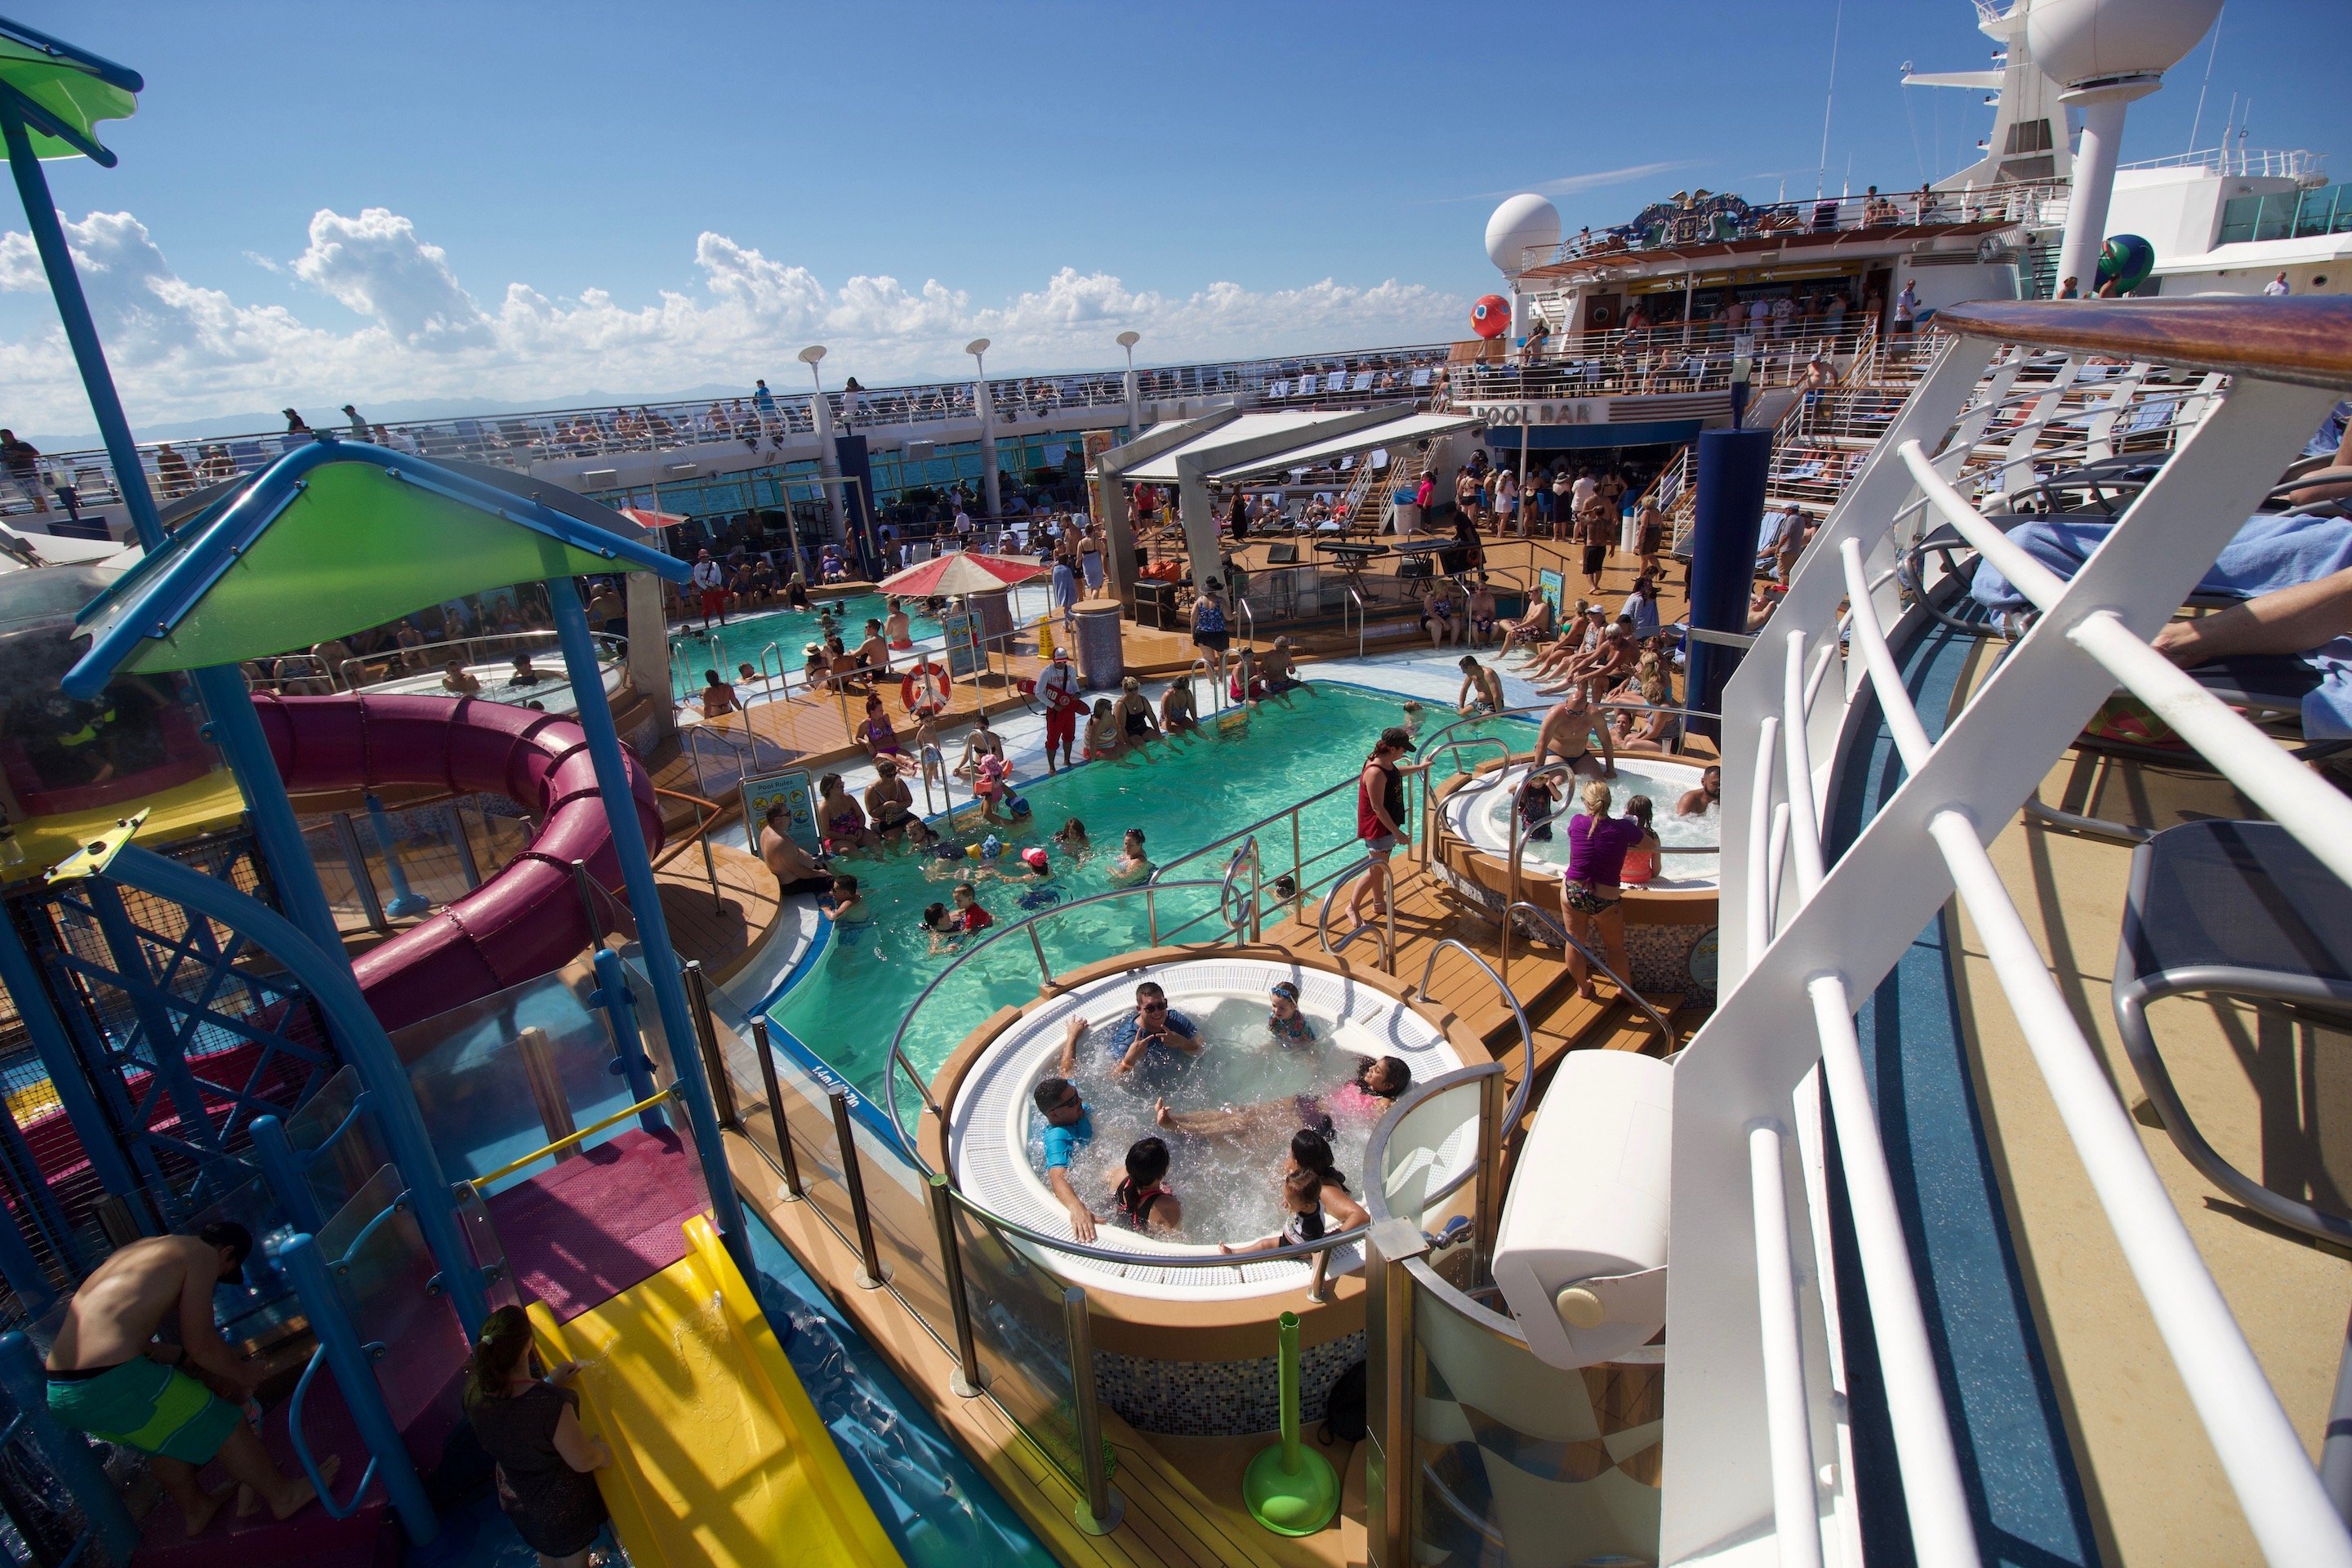 Frequently asked questions about being back on a Royal Caribbean